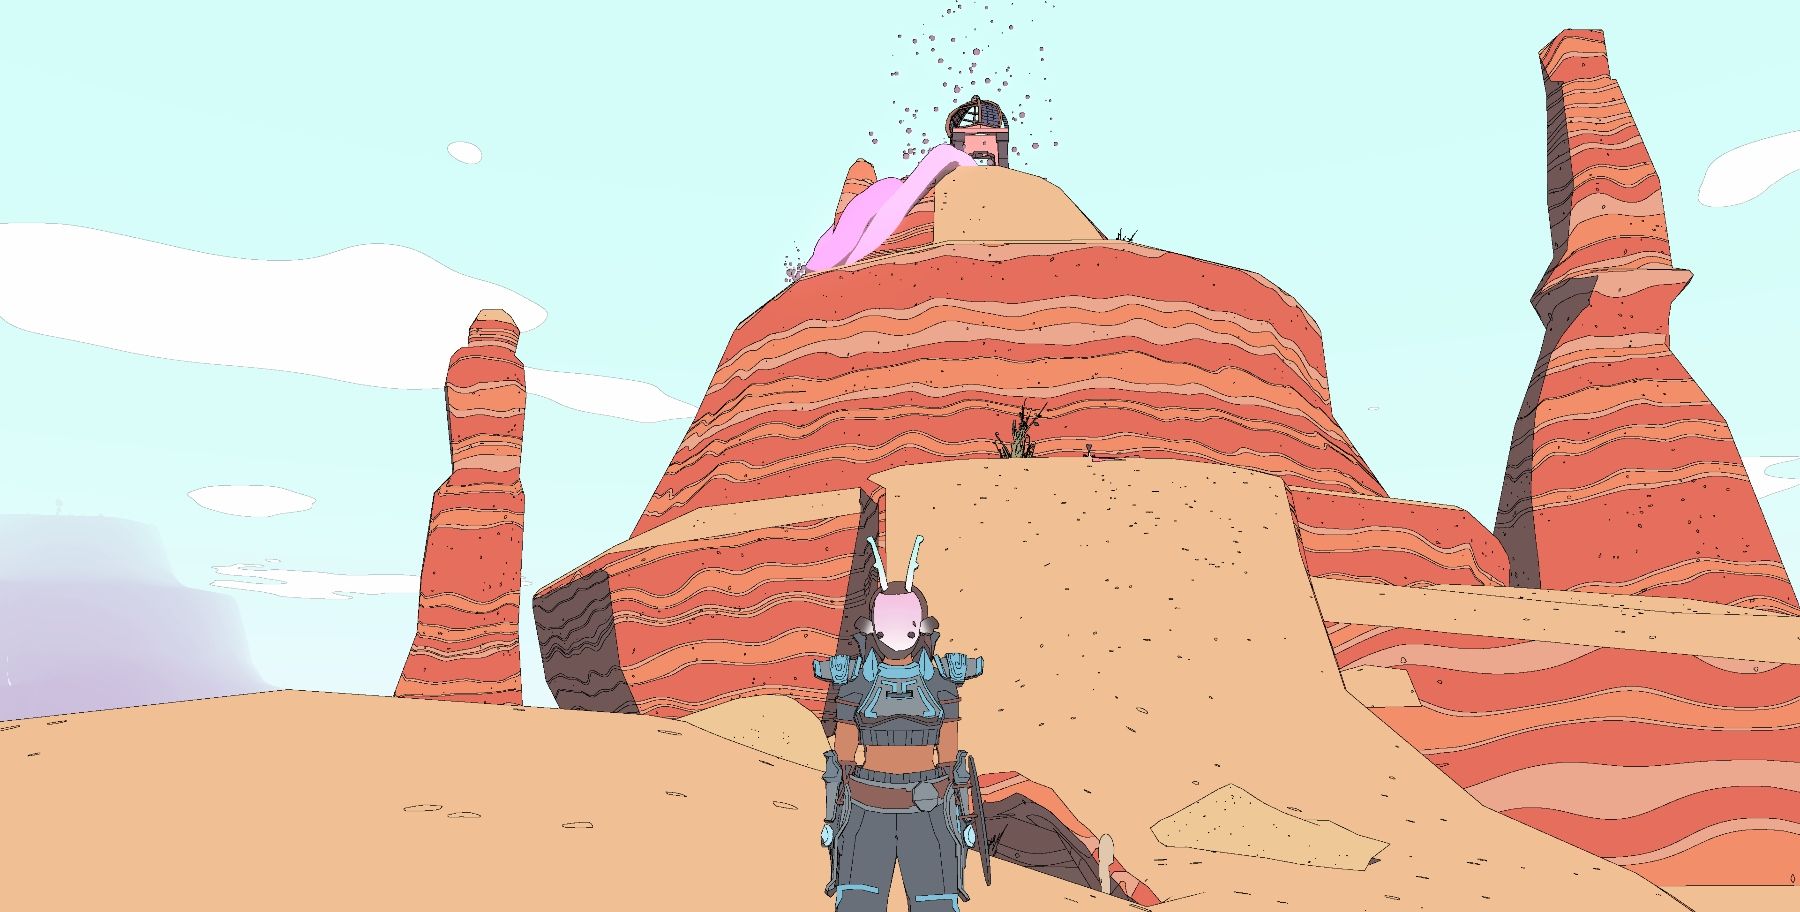 Sable in a white and pink, antlered mask standing in front of a rock formation with a tower peeking out the top and bubbles floating from the tower